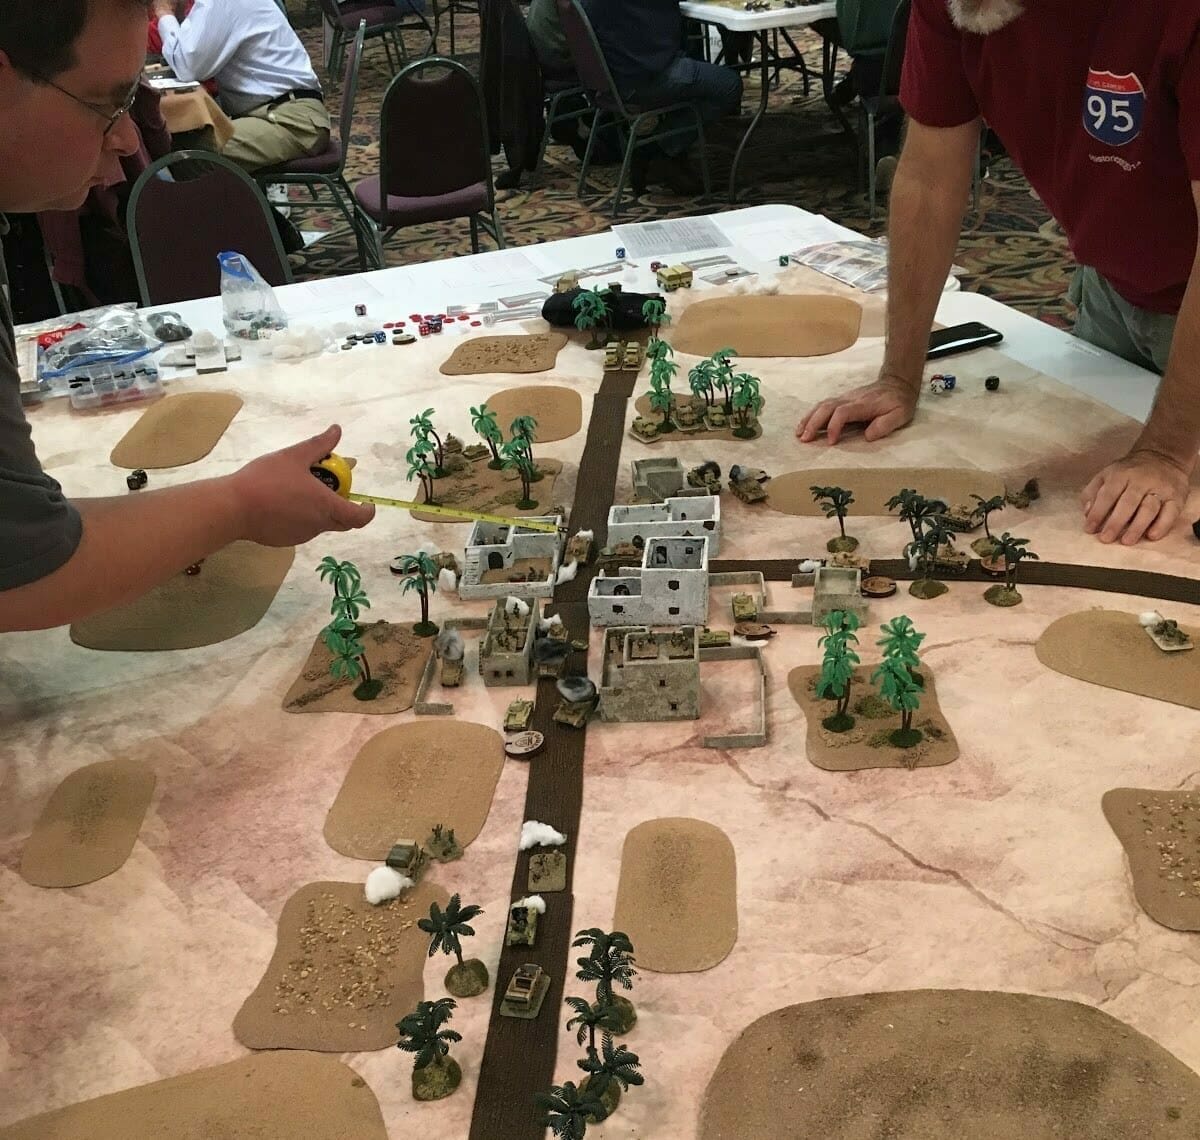 Wargaming simulates combat from different time periods